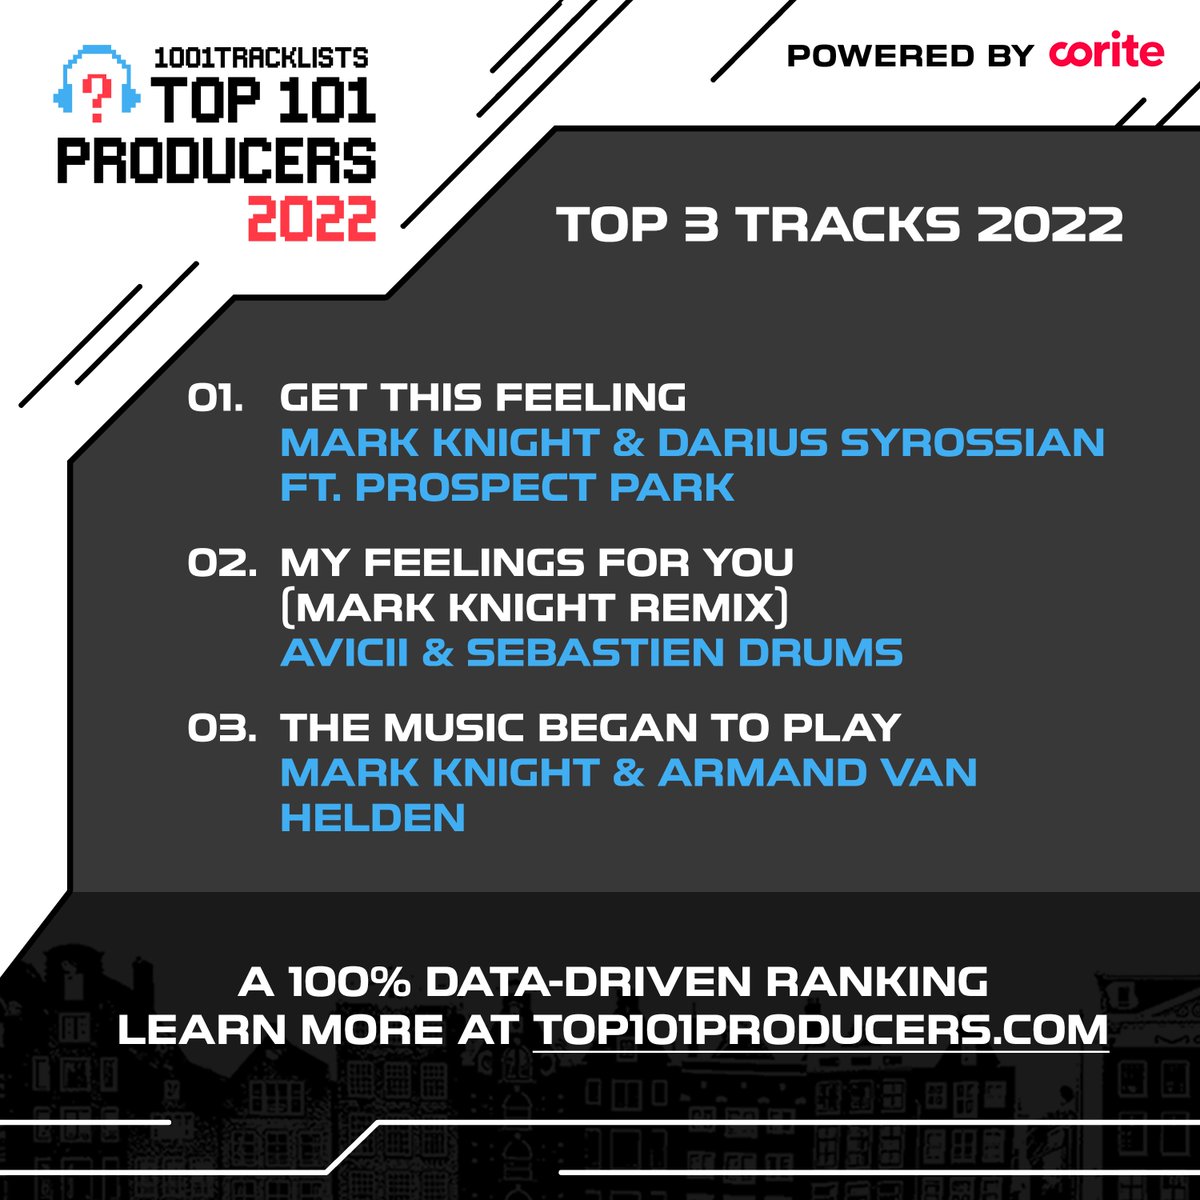 Making his 5th consecutive entry in the rankings, @djmarkknight is up 22 places for his highest finish yet, landing in 27th place in the #Top101Producers2022.